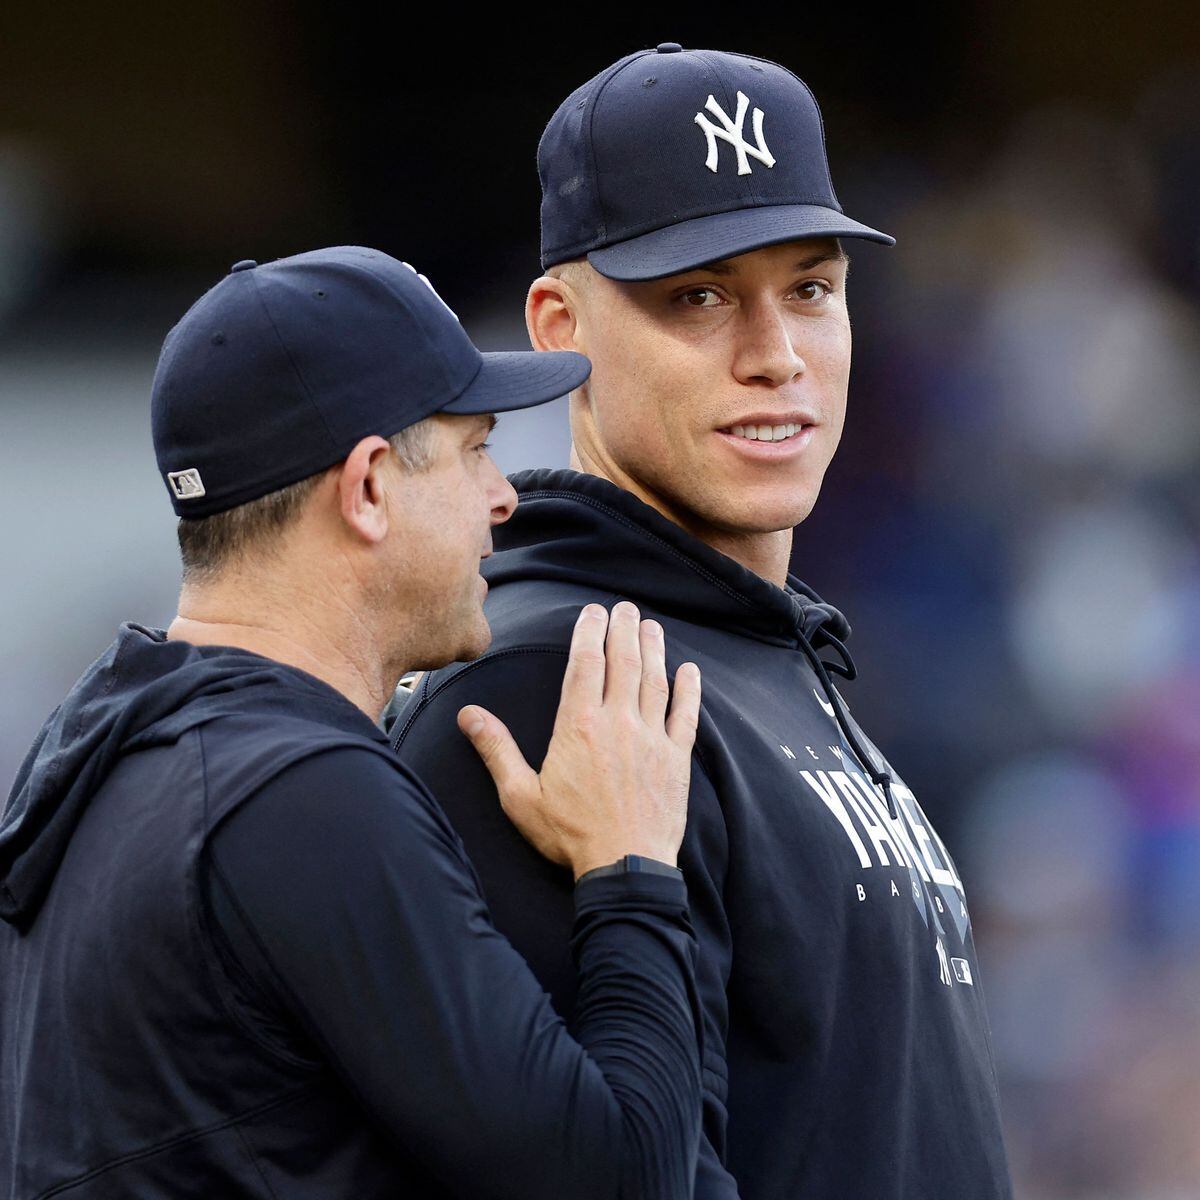 One month into toe injury, Aaron Judge begins hitting off a tee but says  he's unable to run